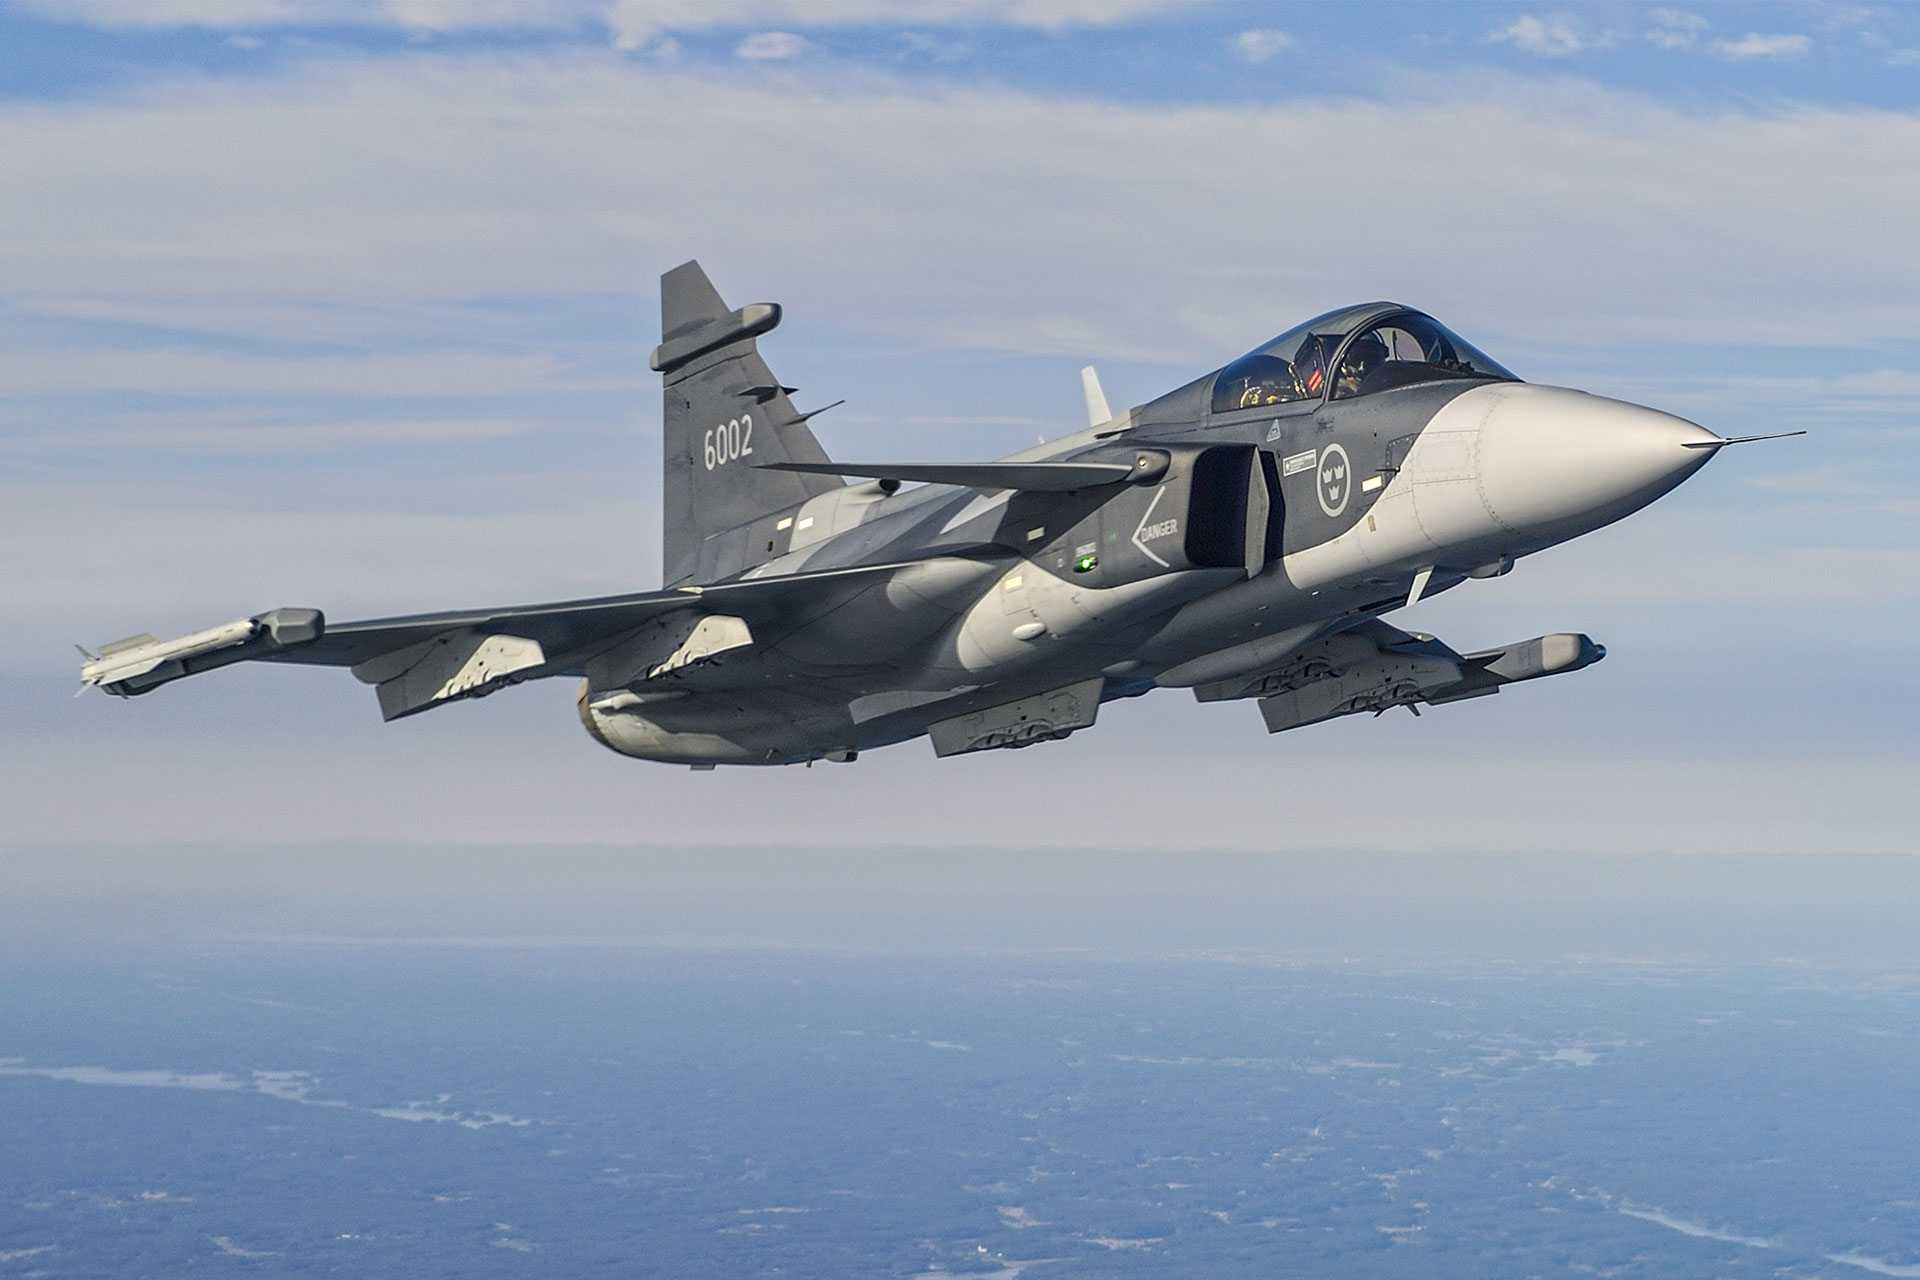 General 1920x1280 JAS-39 Gripen aircraft sky military jet fighter Swedish Air Force Swedish aircraft